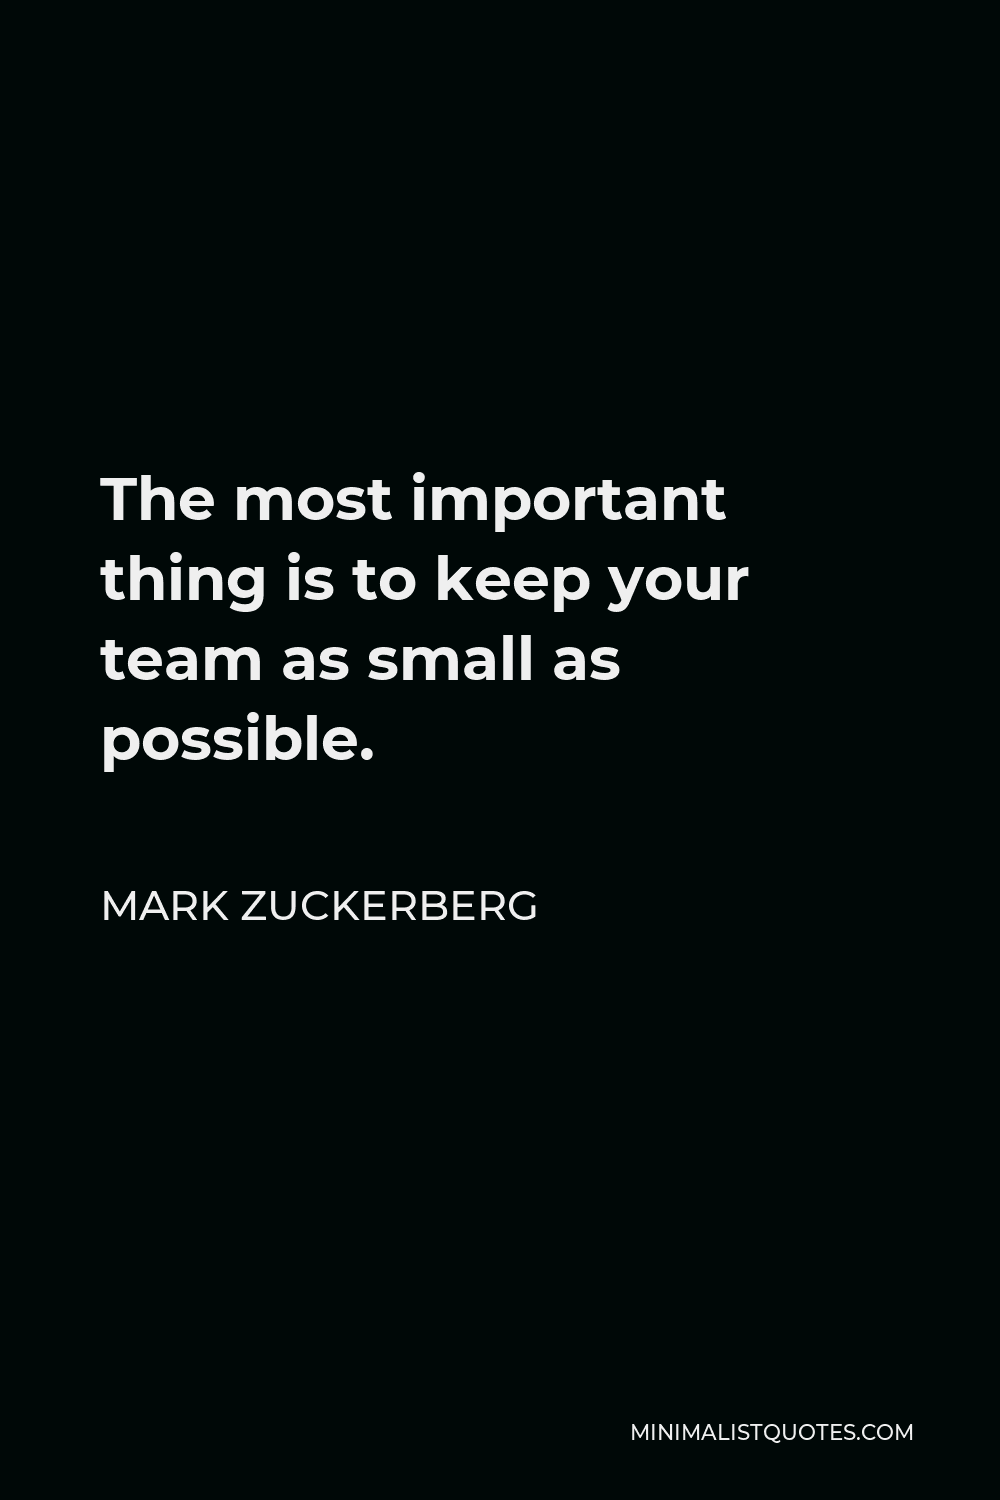 Mark Zuckerberg Quote - The most important thing is to keep your team as small as possible.